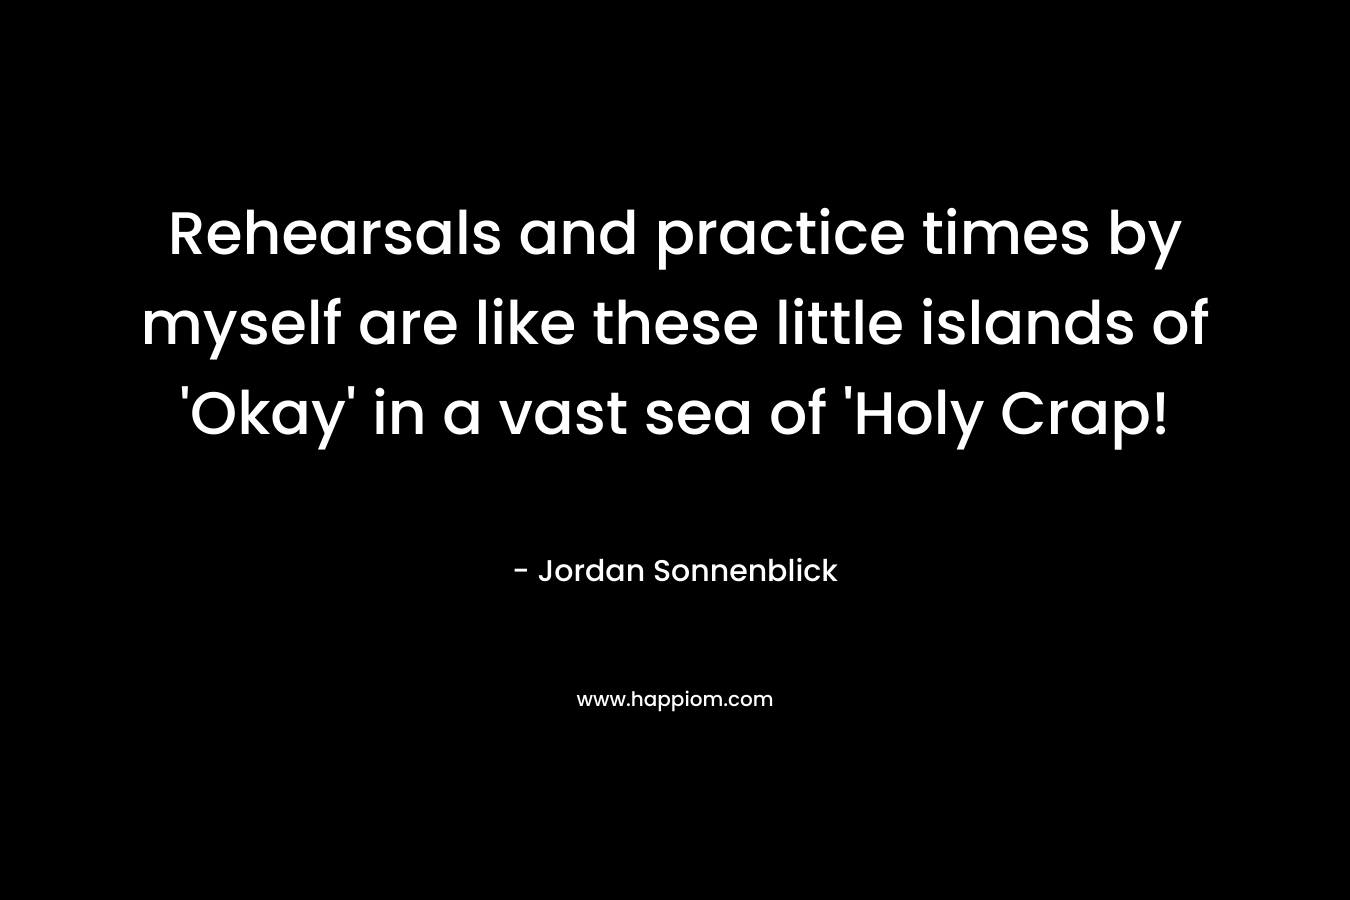 Rehearsals and practice times by myself are like these little islands of ‘Okay’ in a vast sea of ‘Holy Crap! – Jordan Sonnenblick